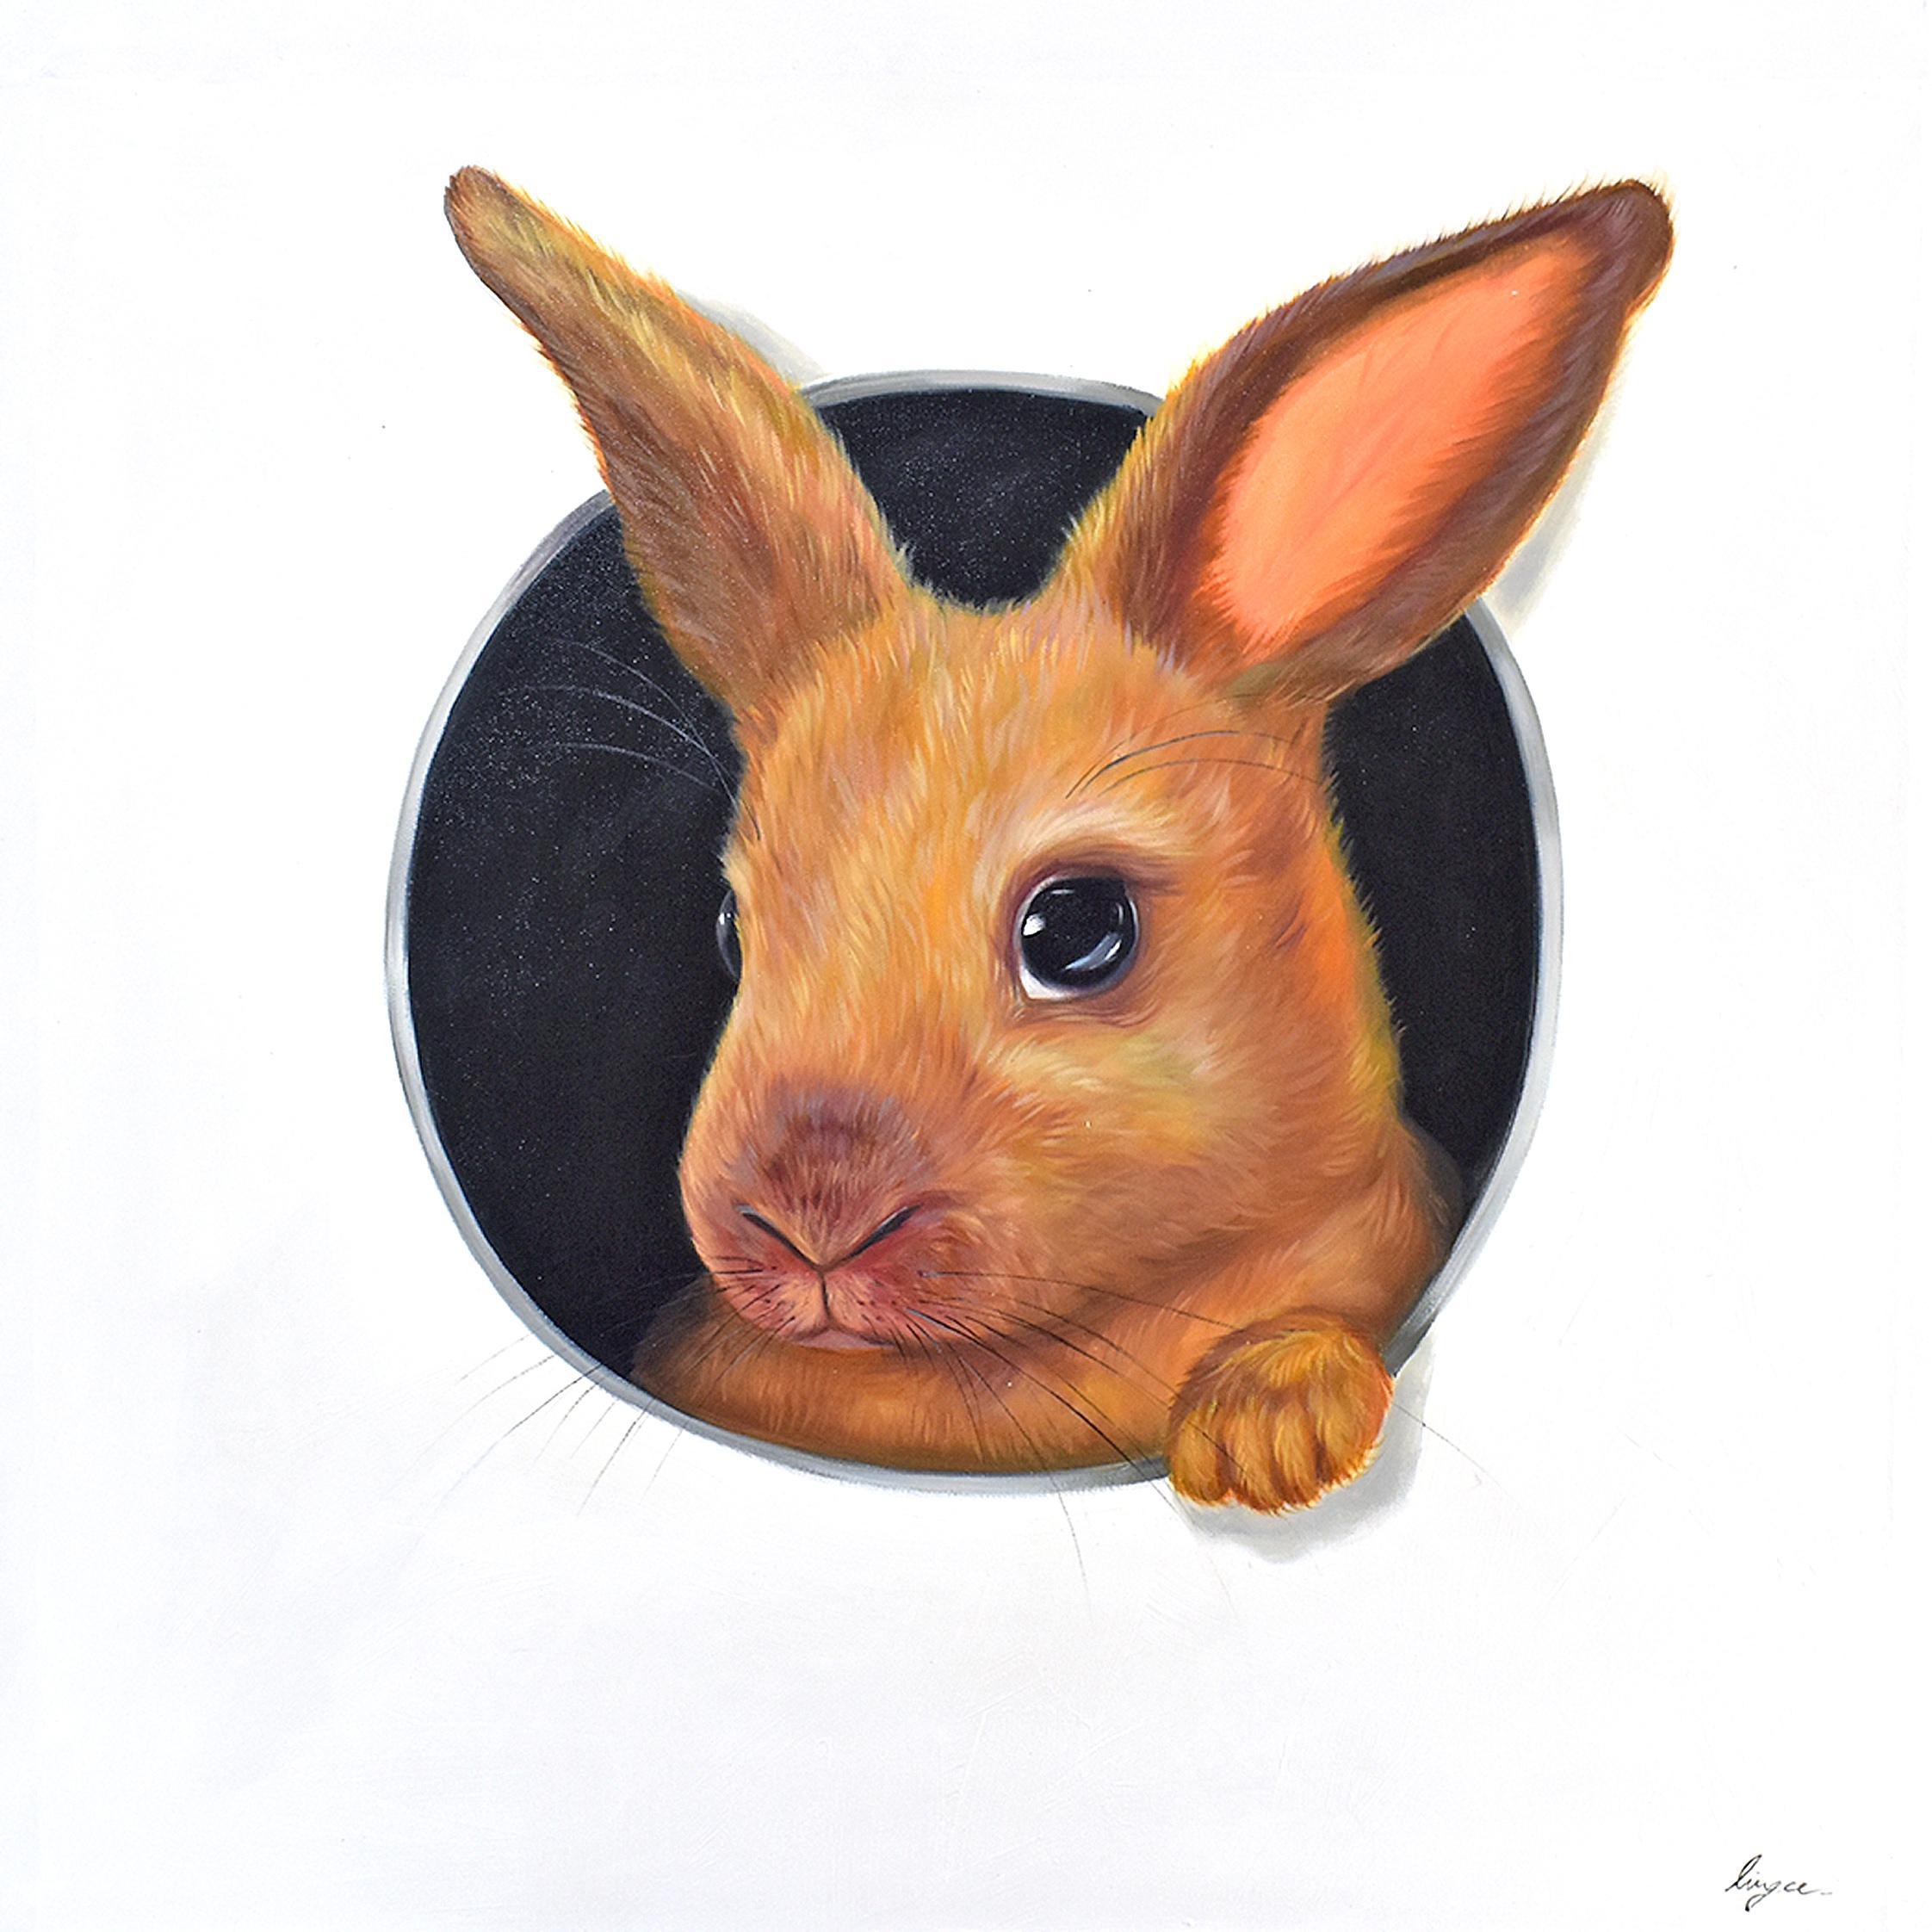 Lingee Bangkhuntod Animal Painting - Hare In Hole 6. Rabbit looking Through a Hole. Adorable Rabbit Oil painting